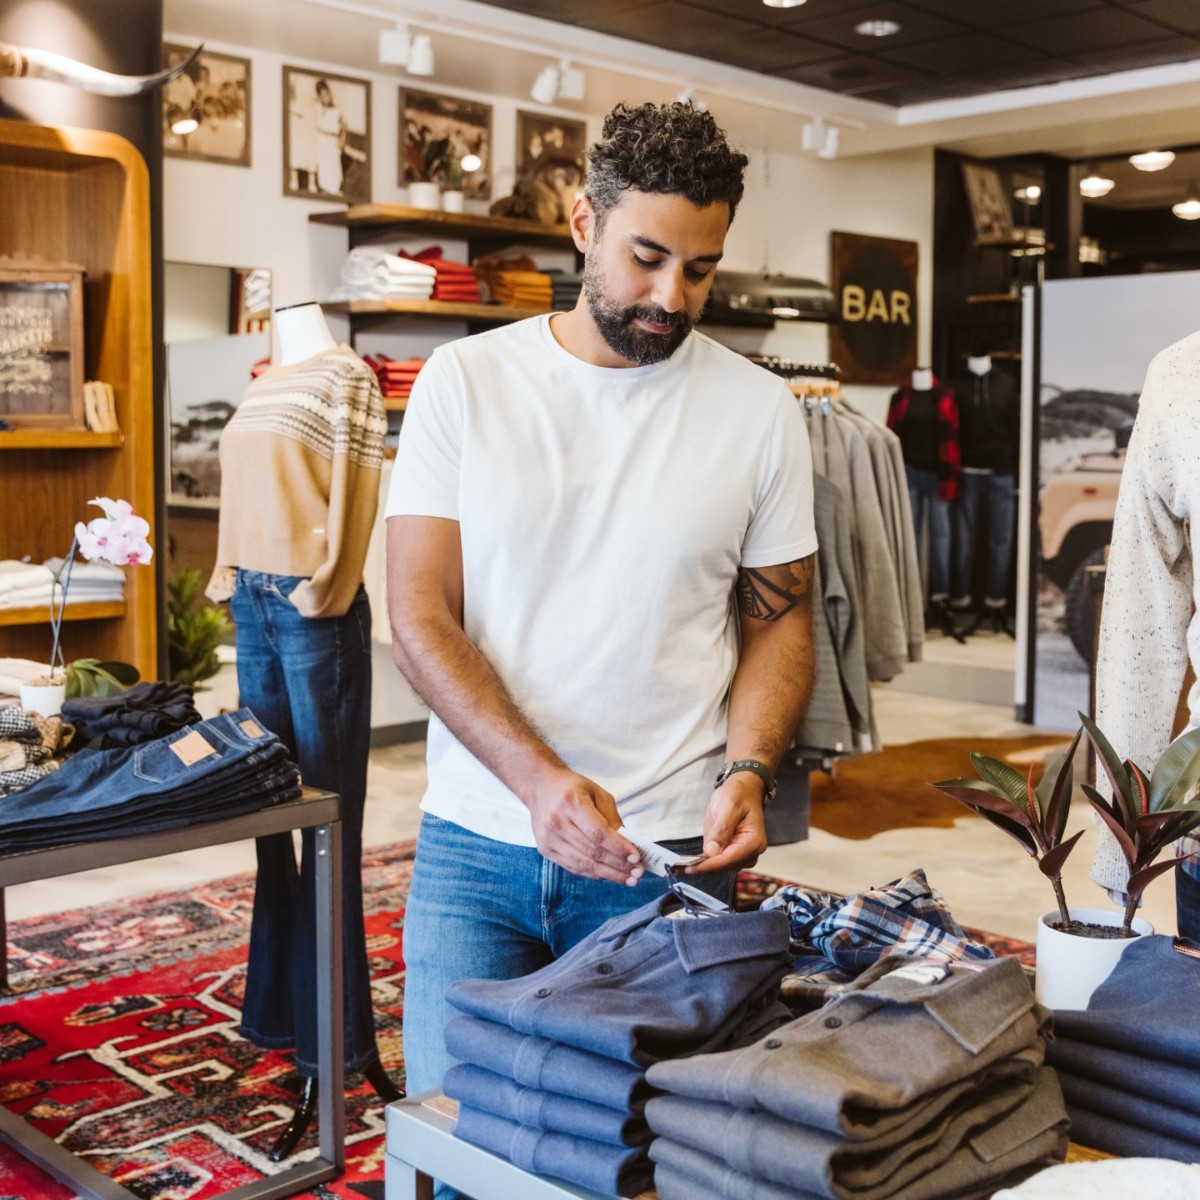 Upgrade Dad's style with the best everyday looks from @thenormalbrand. #mynormalbrand #fathersday #ontheplaza